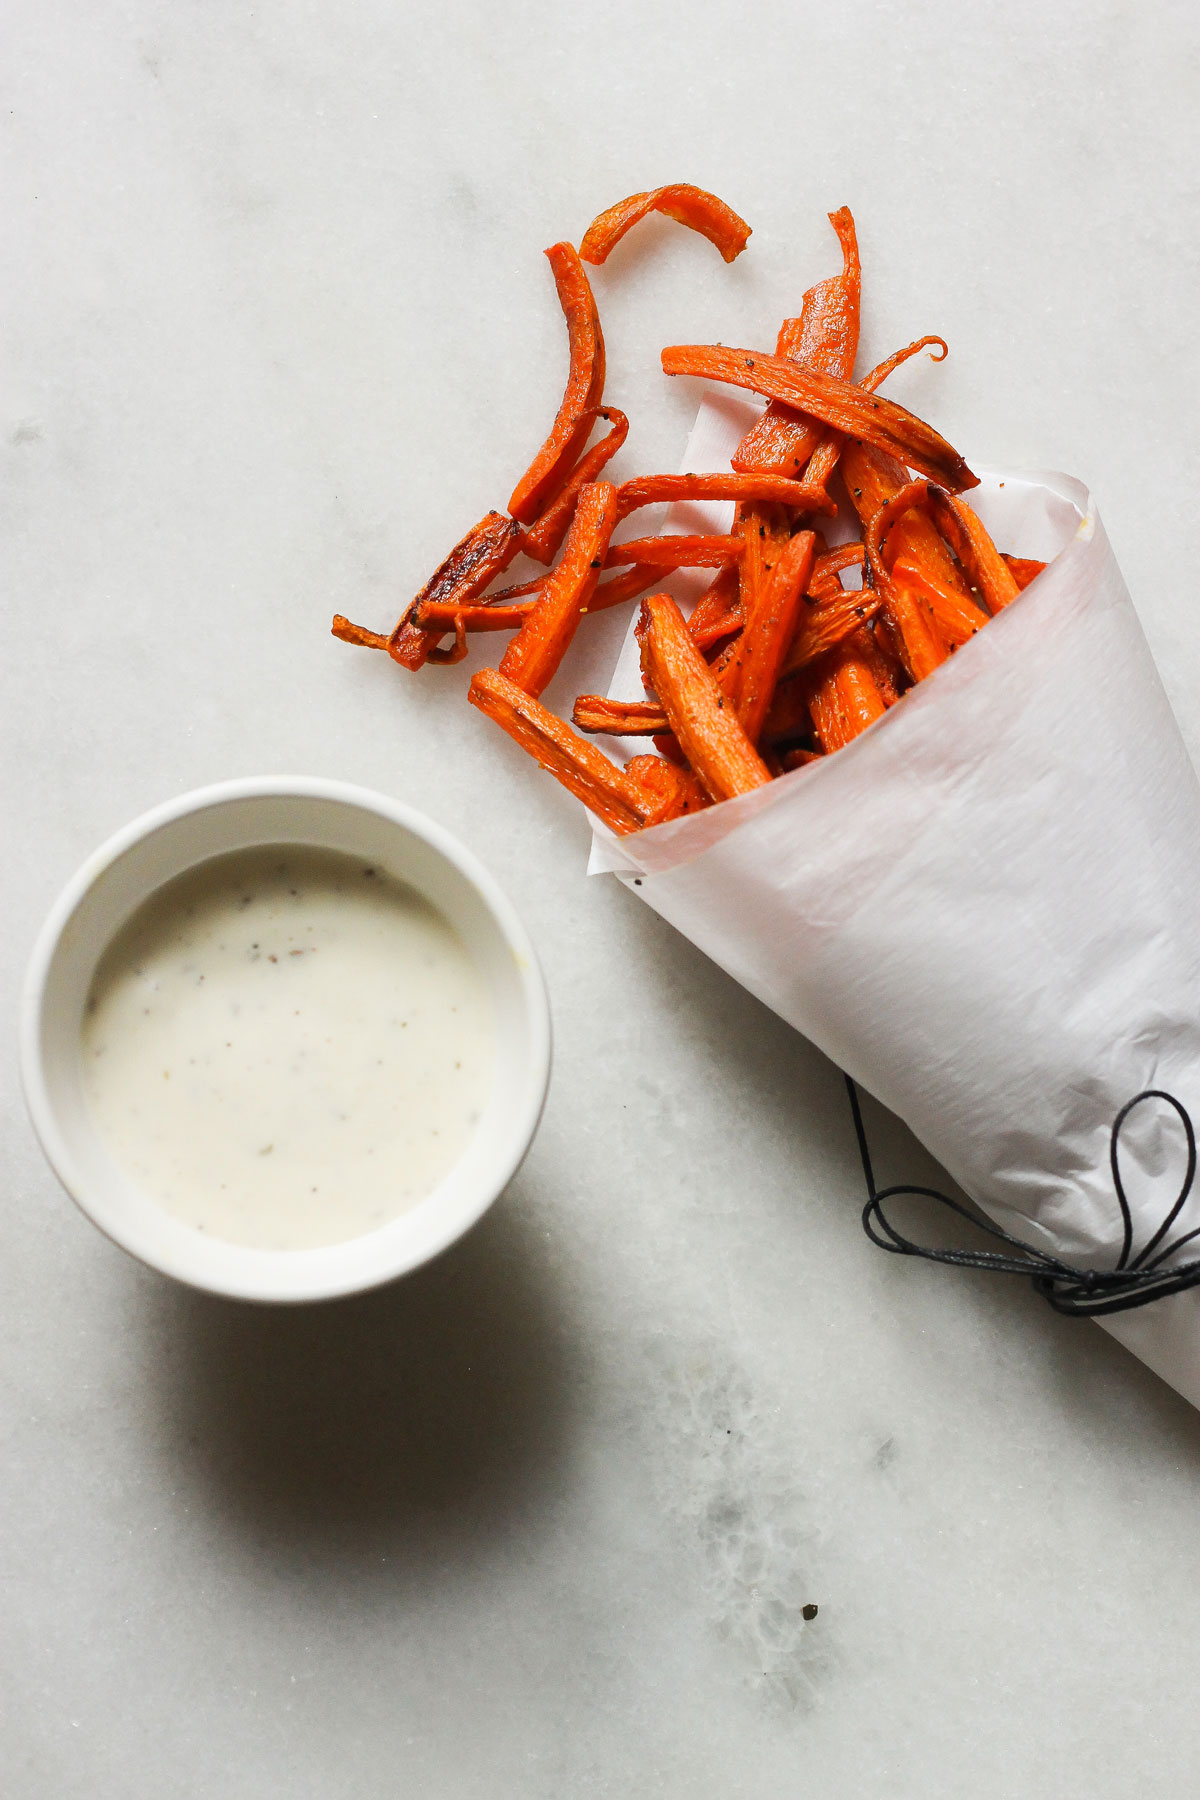 Oven-Baked Carrot Fries Recipe